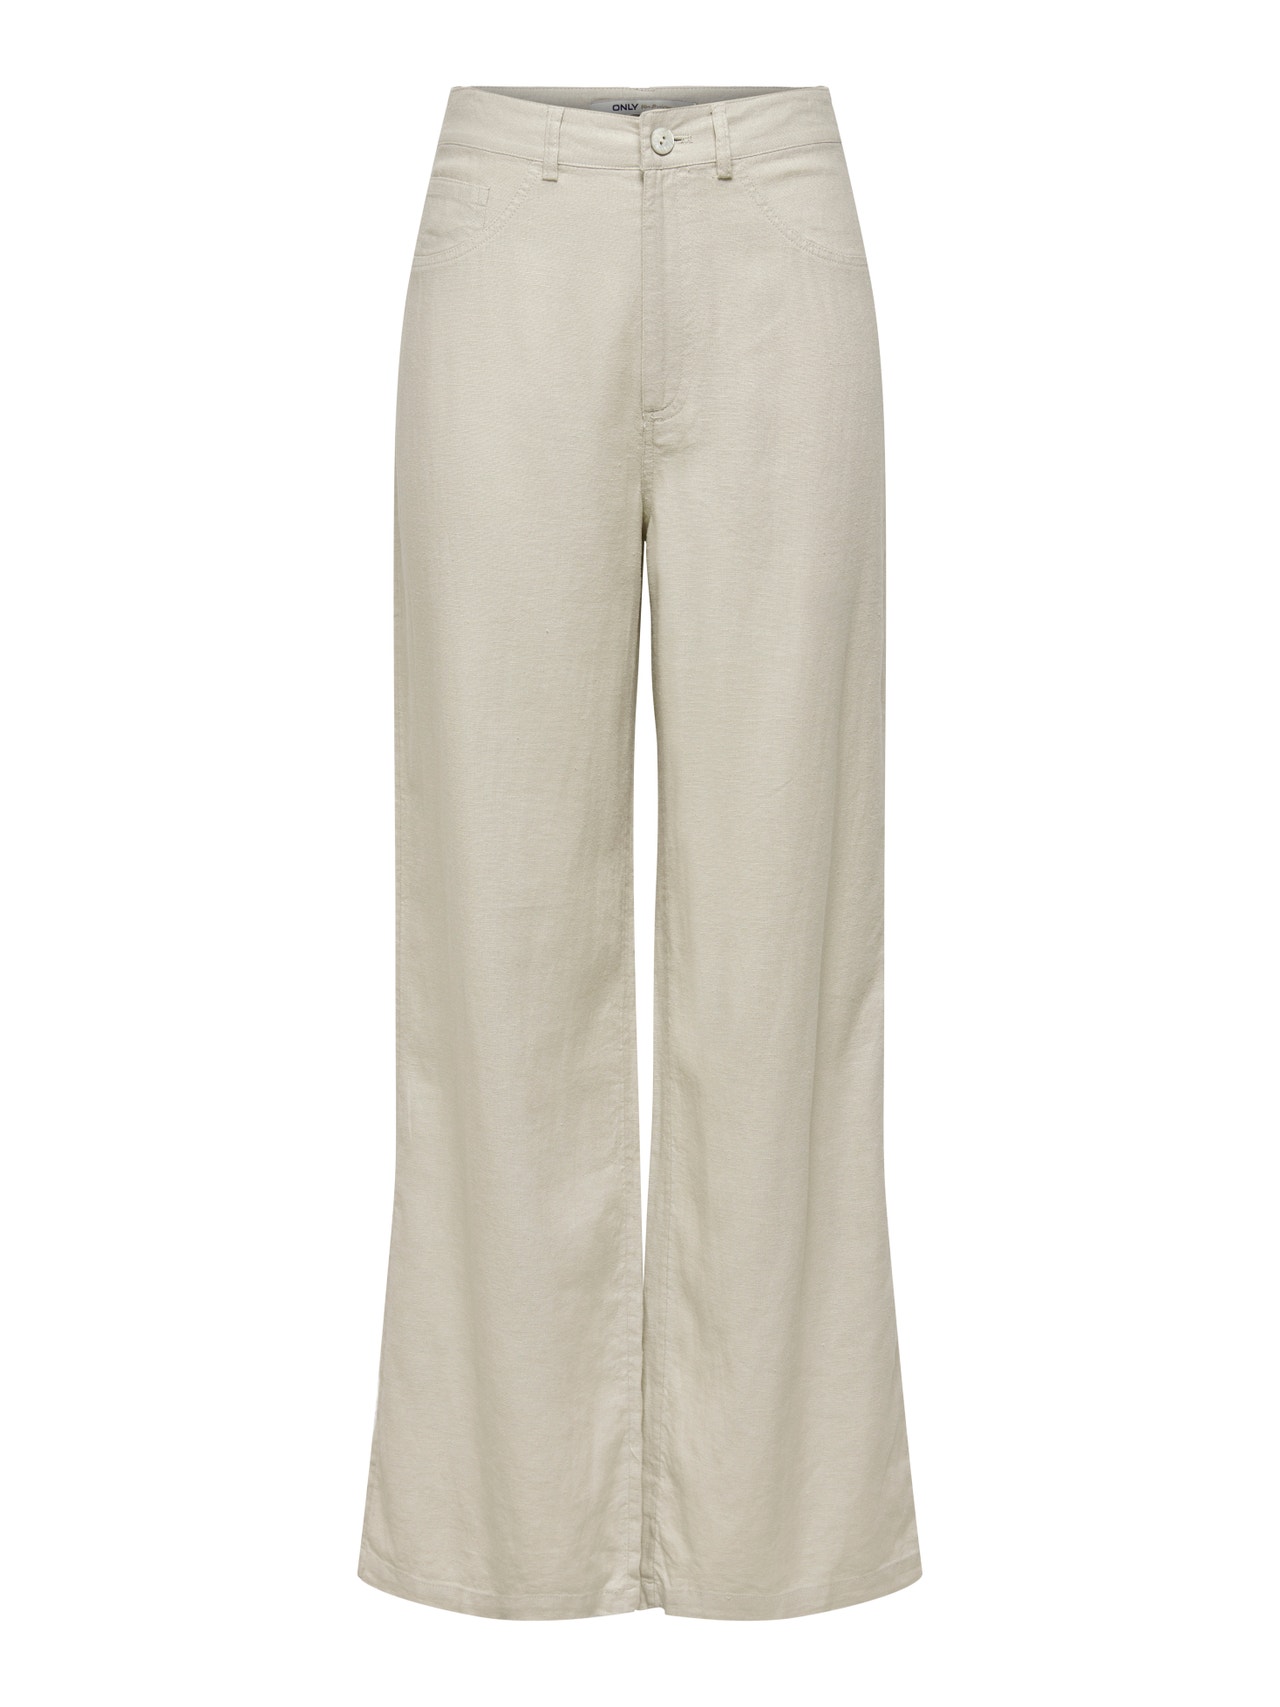 ONLY Wide Leg Fit Extra high waist Trousers -Silver Lining - 15259942